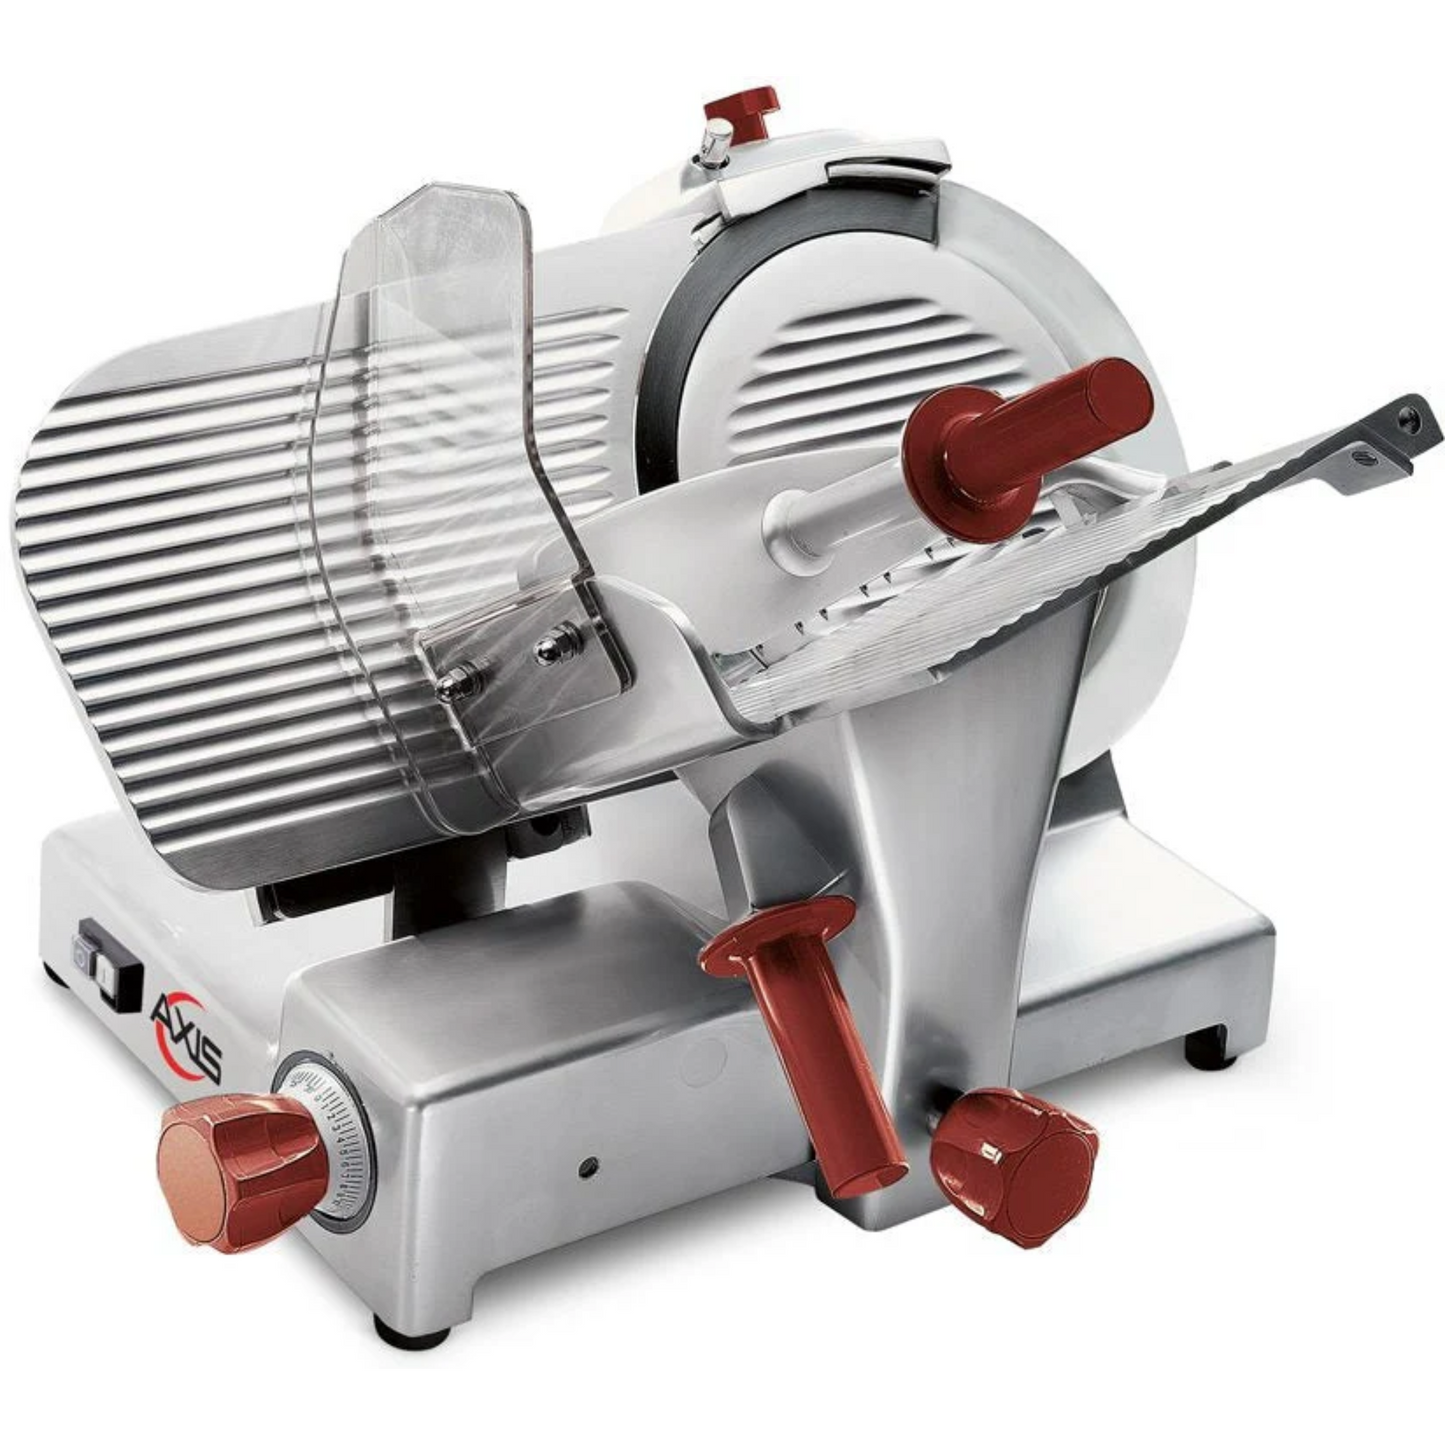 Axis AX-S14GiX Manual Commercial Food Slicer with 14" Blade, Gear Driven 1/2 HP